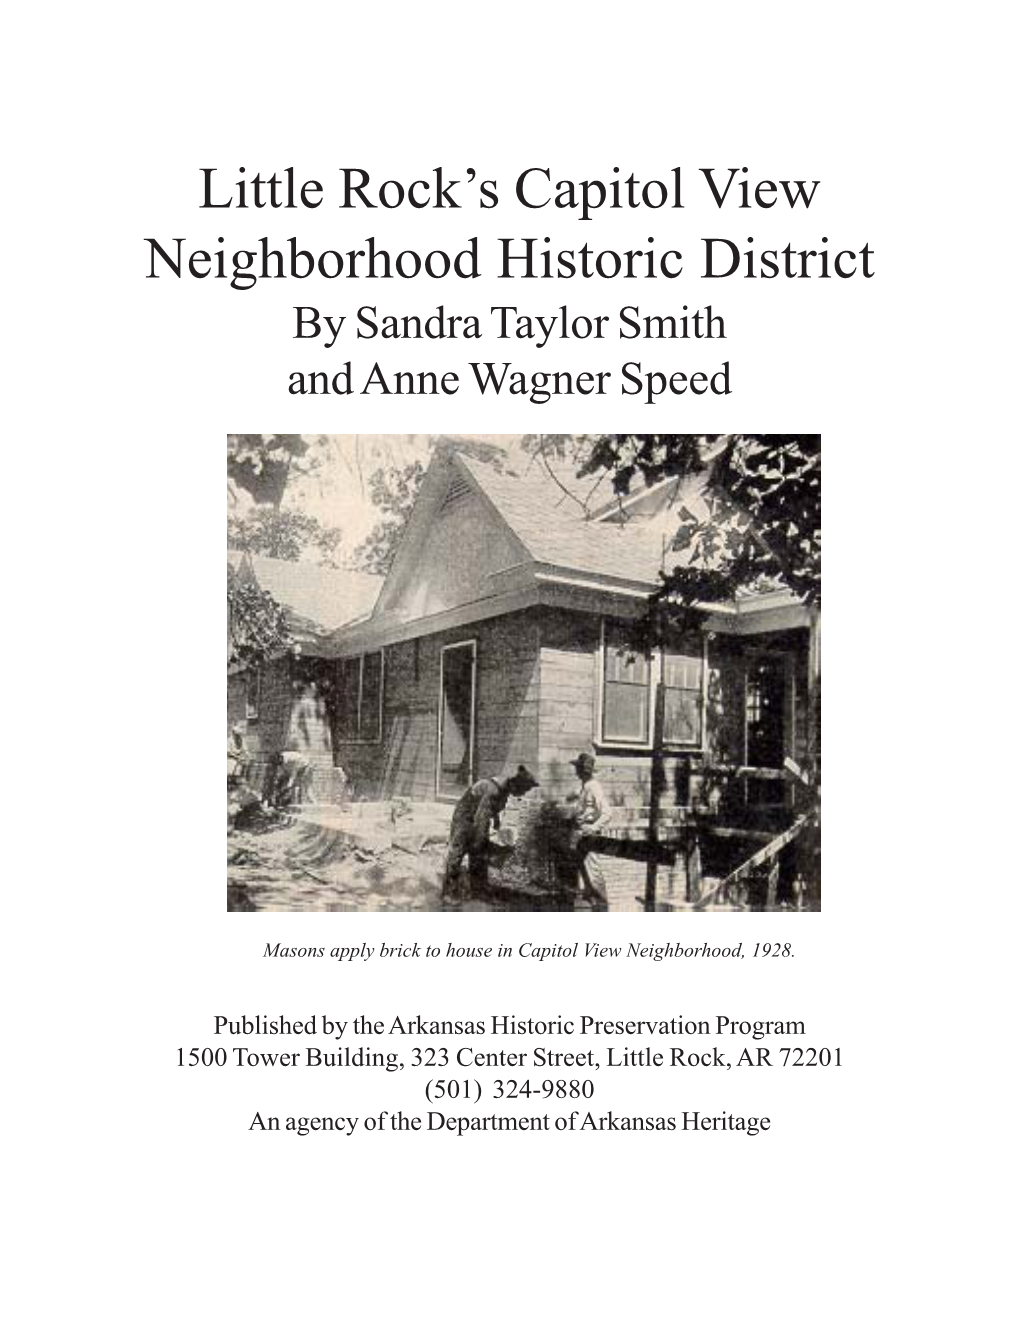 Capitol View Neighborhood Historic District by Sandra Taylor Smith and Anne Wagner Speed